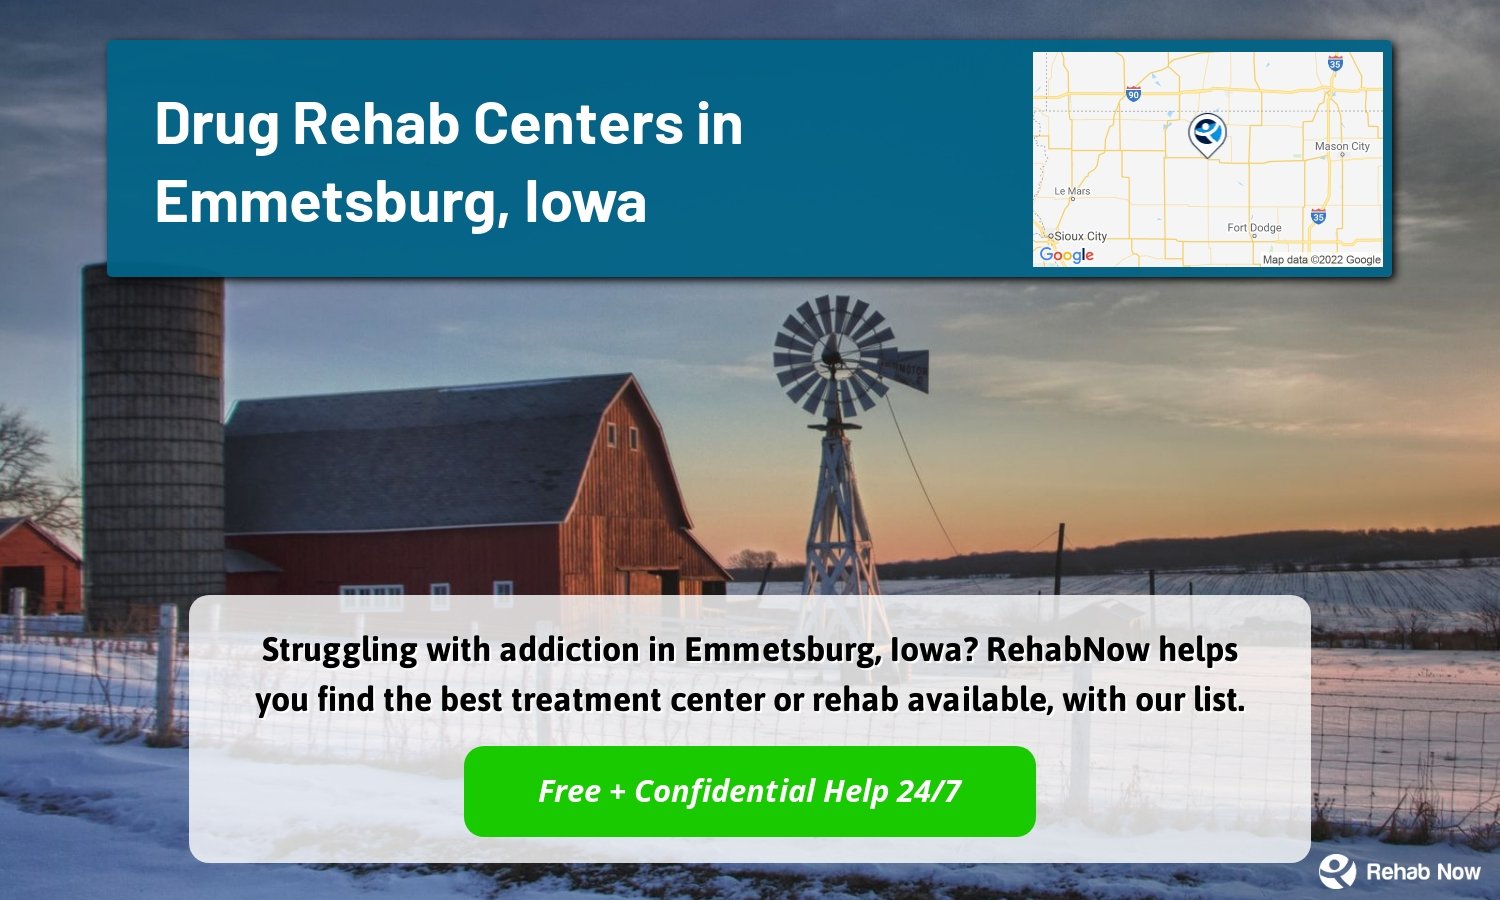 Struggling with addiction in Emmetsburg, Iowa? RehabNow helps you find the best treatment center or rehab available, with our list.